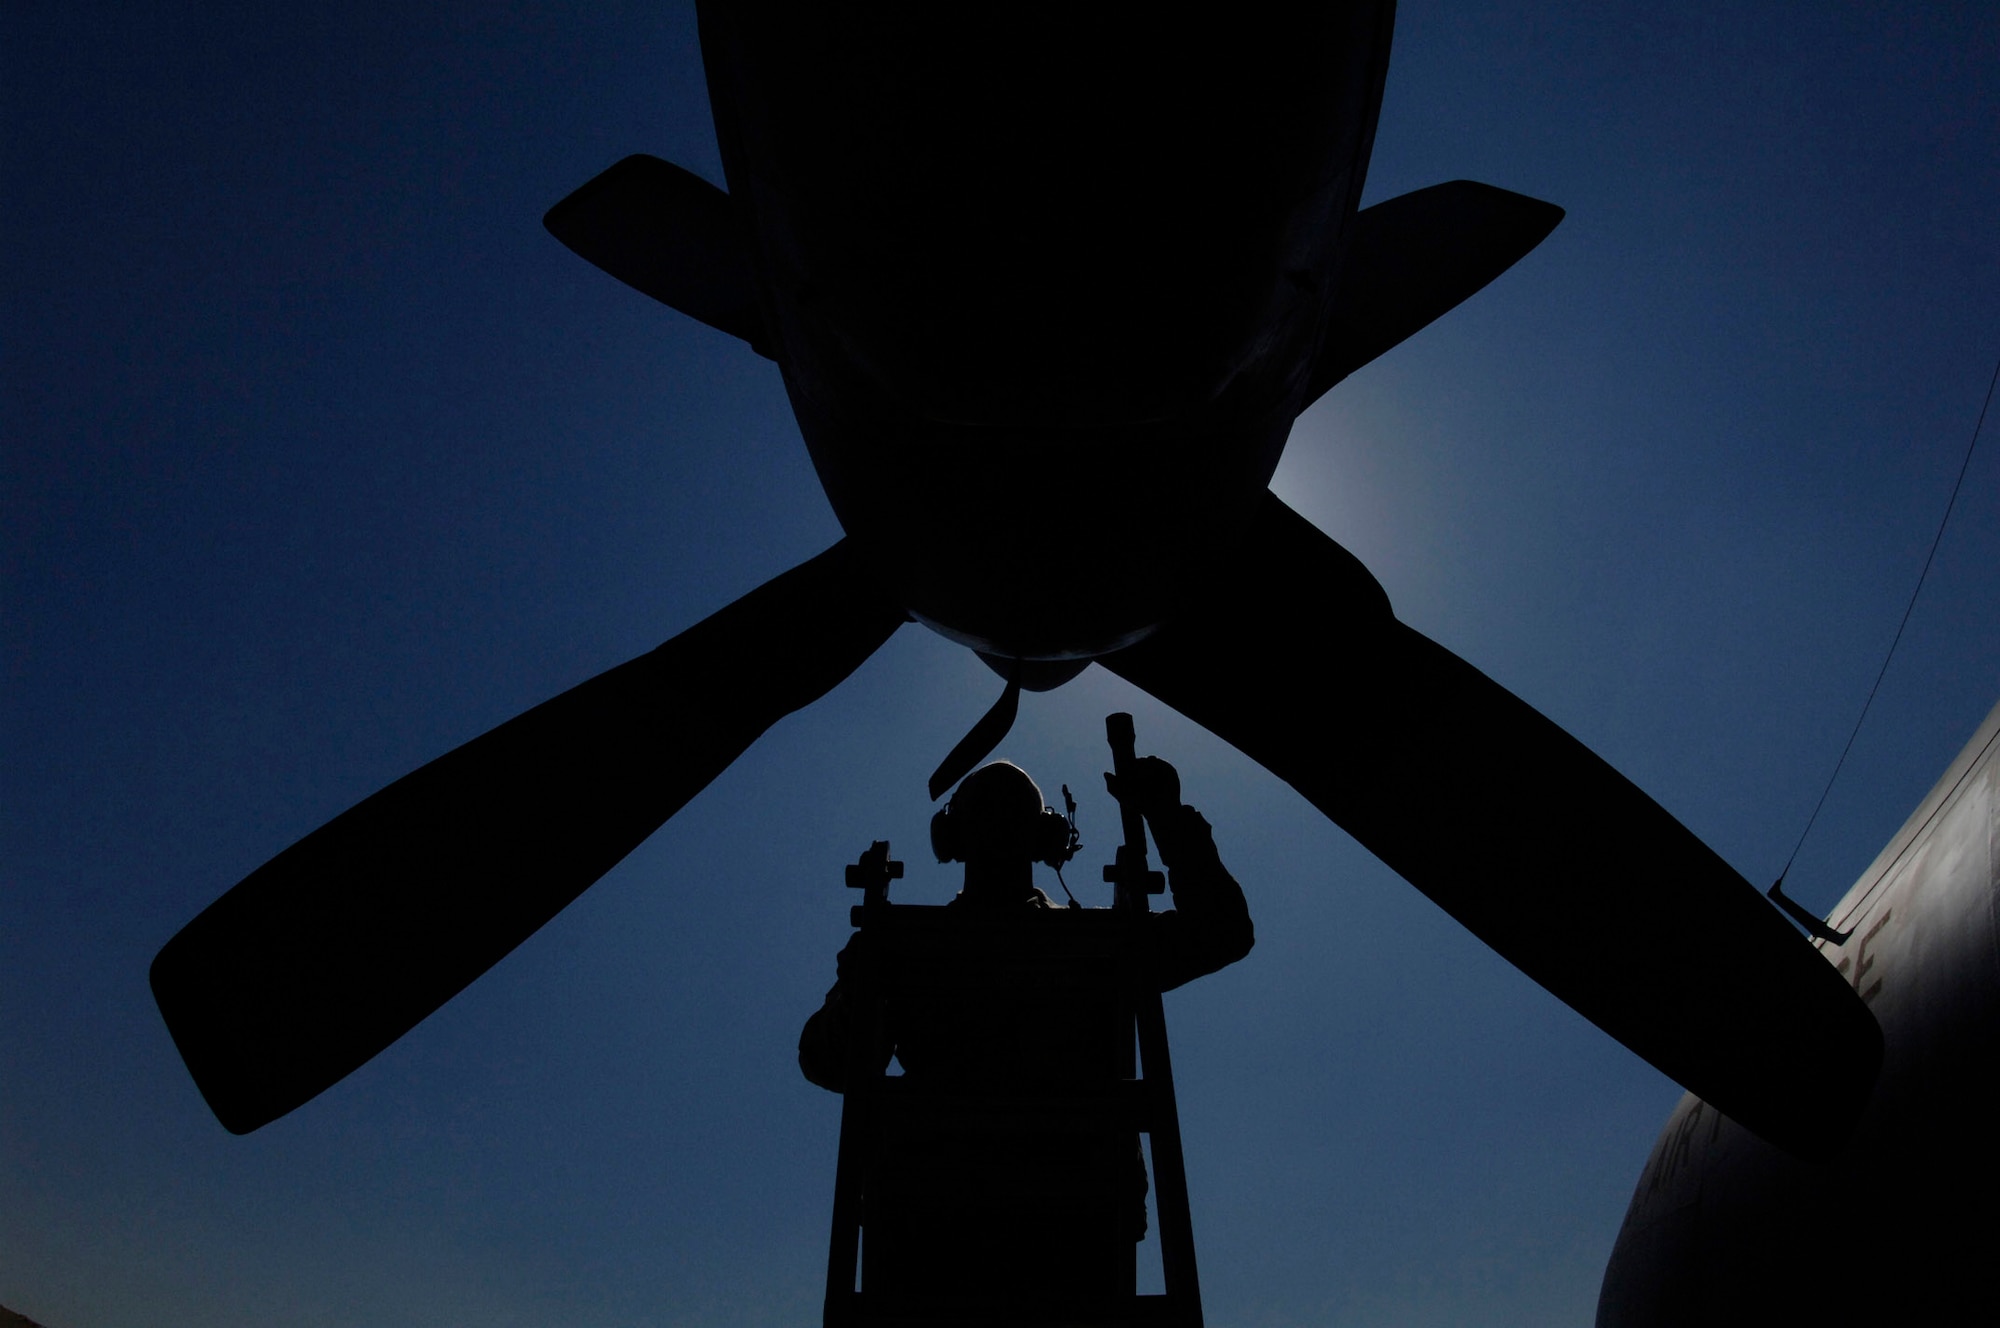 Tech. Sgt. John Ryan conducts a post-flight inspection of the turbine of a C-130 Hercules Jan. 25 in Southwest Asia. Sergeant Ryan is a 746th Aircraft Maintenance Unit crew chief. (U.S. Air Force photo/Staff Sgt. David Miller)